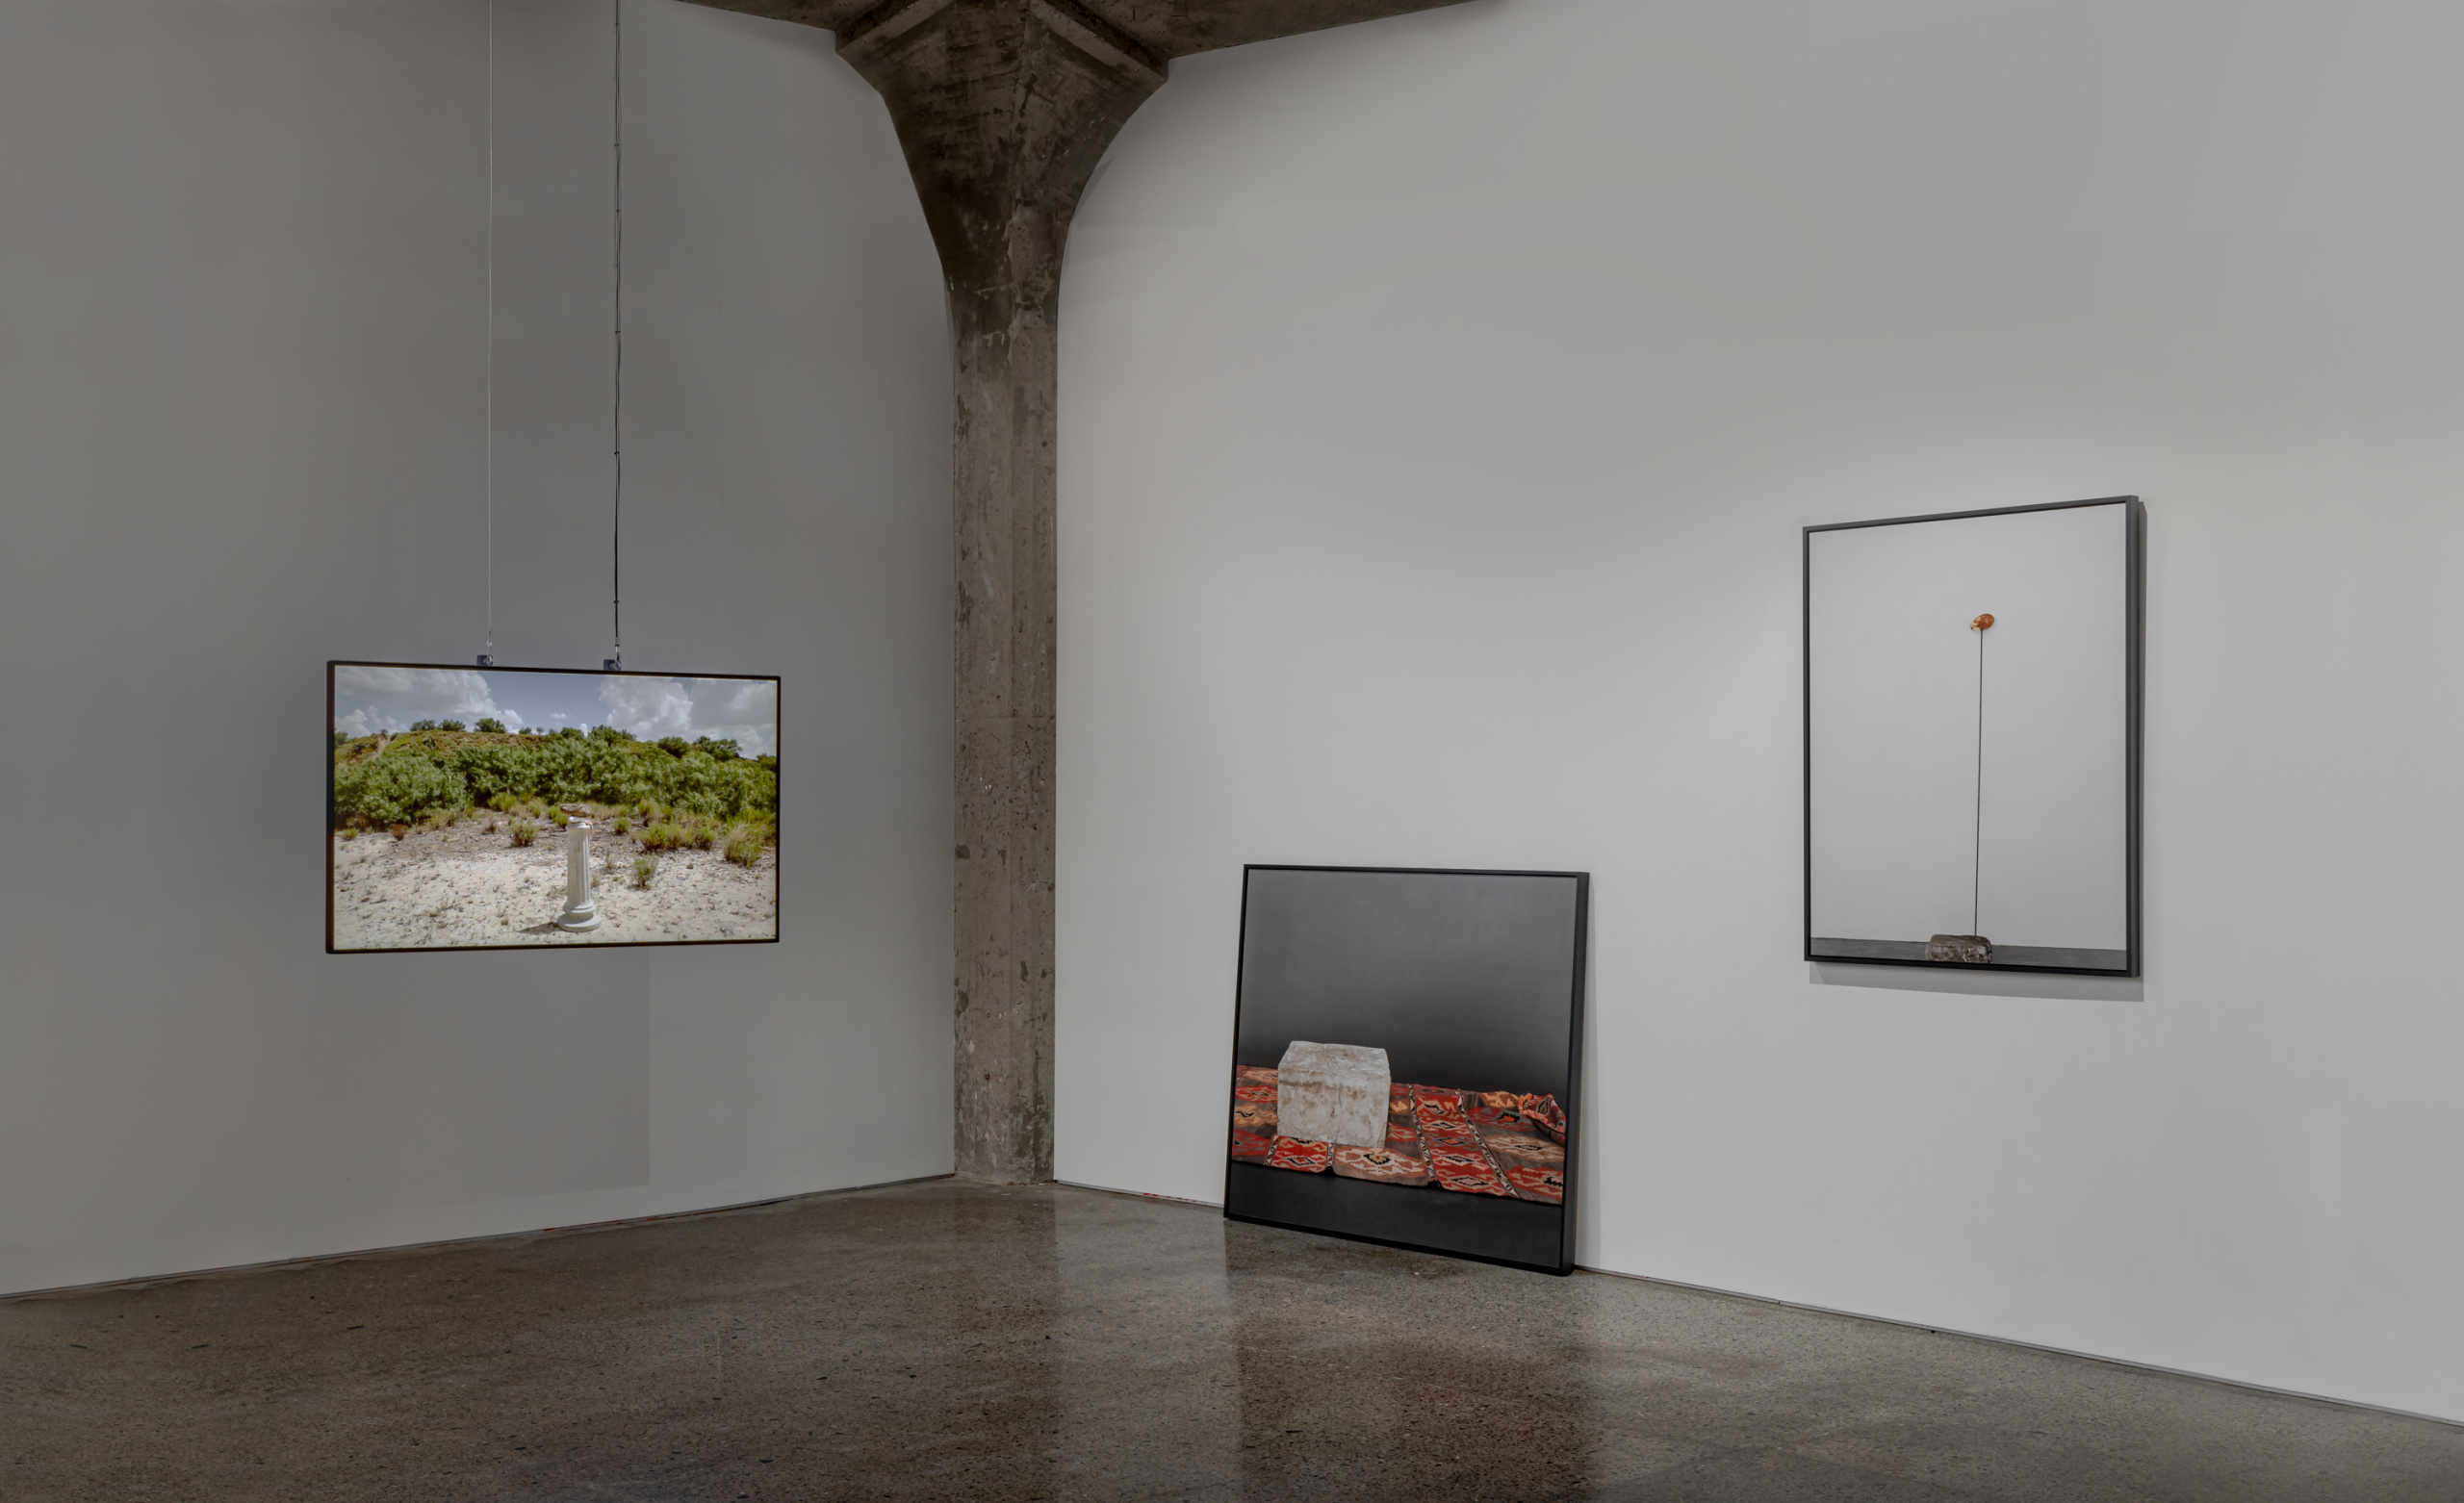 Fatma Bucak, A Study of Eight Landscapes, installation view, Museum of Contemporary Art Toronto, 2020–21. Courtesy of the artist and MOCA. Photo: Toni Hafkenscheid